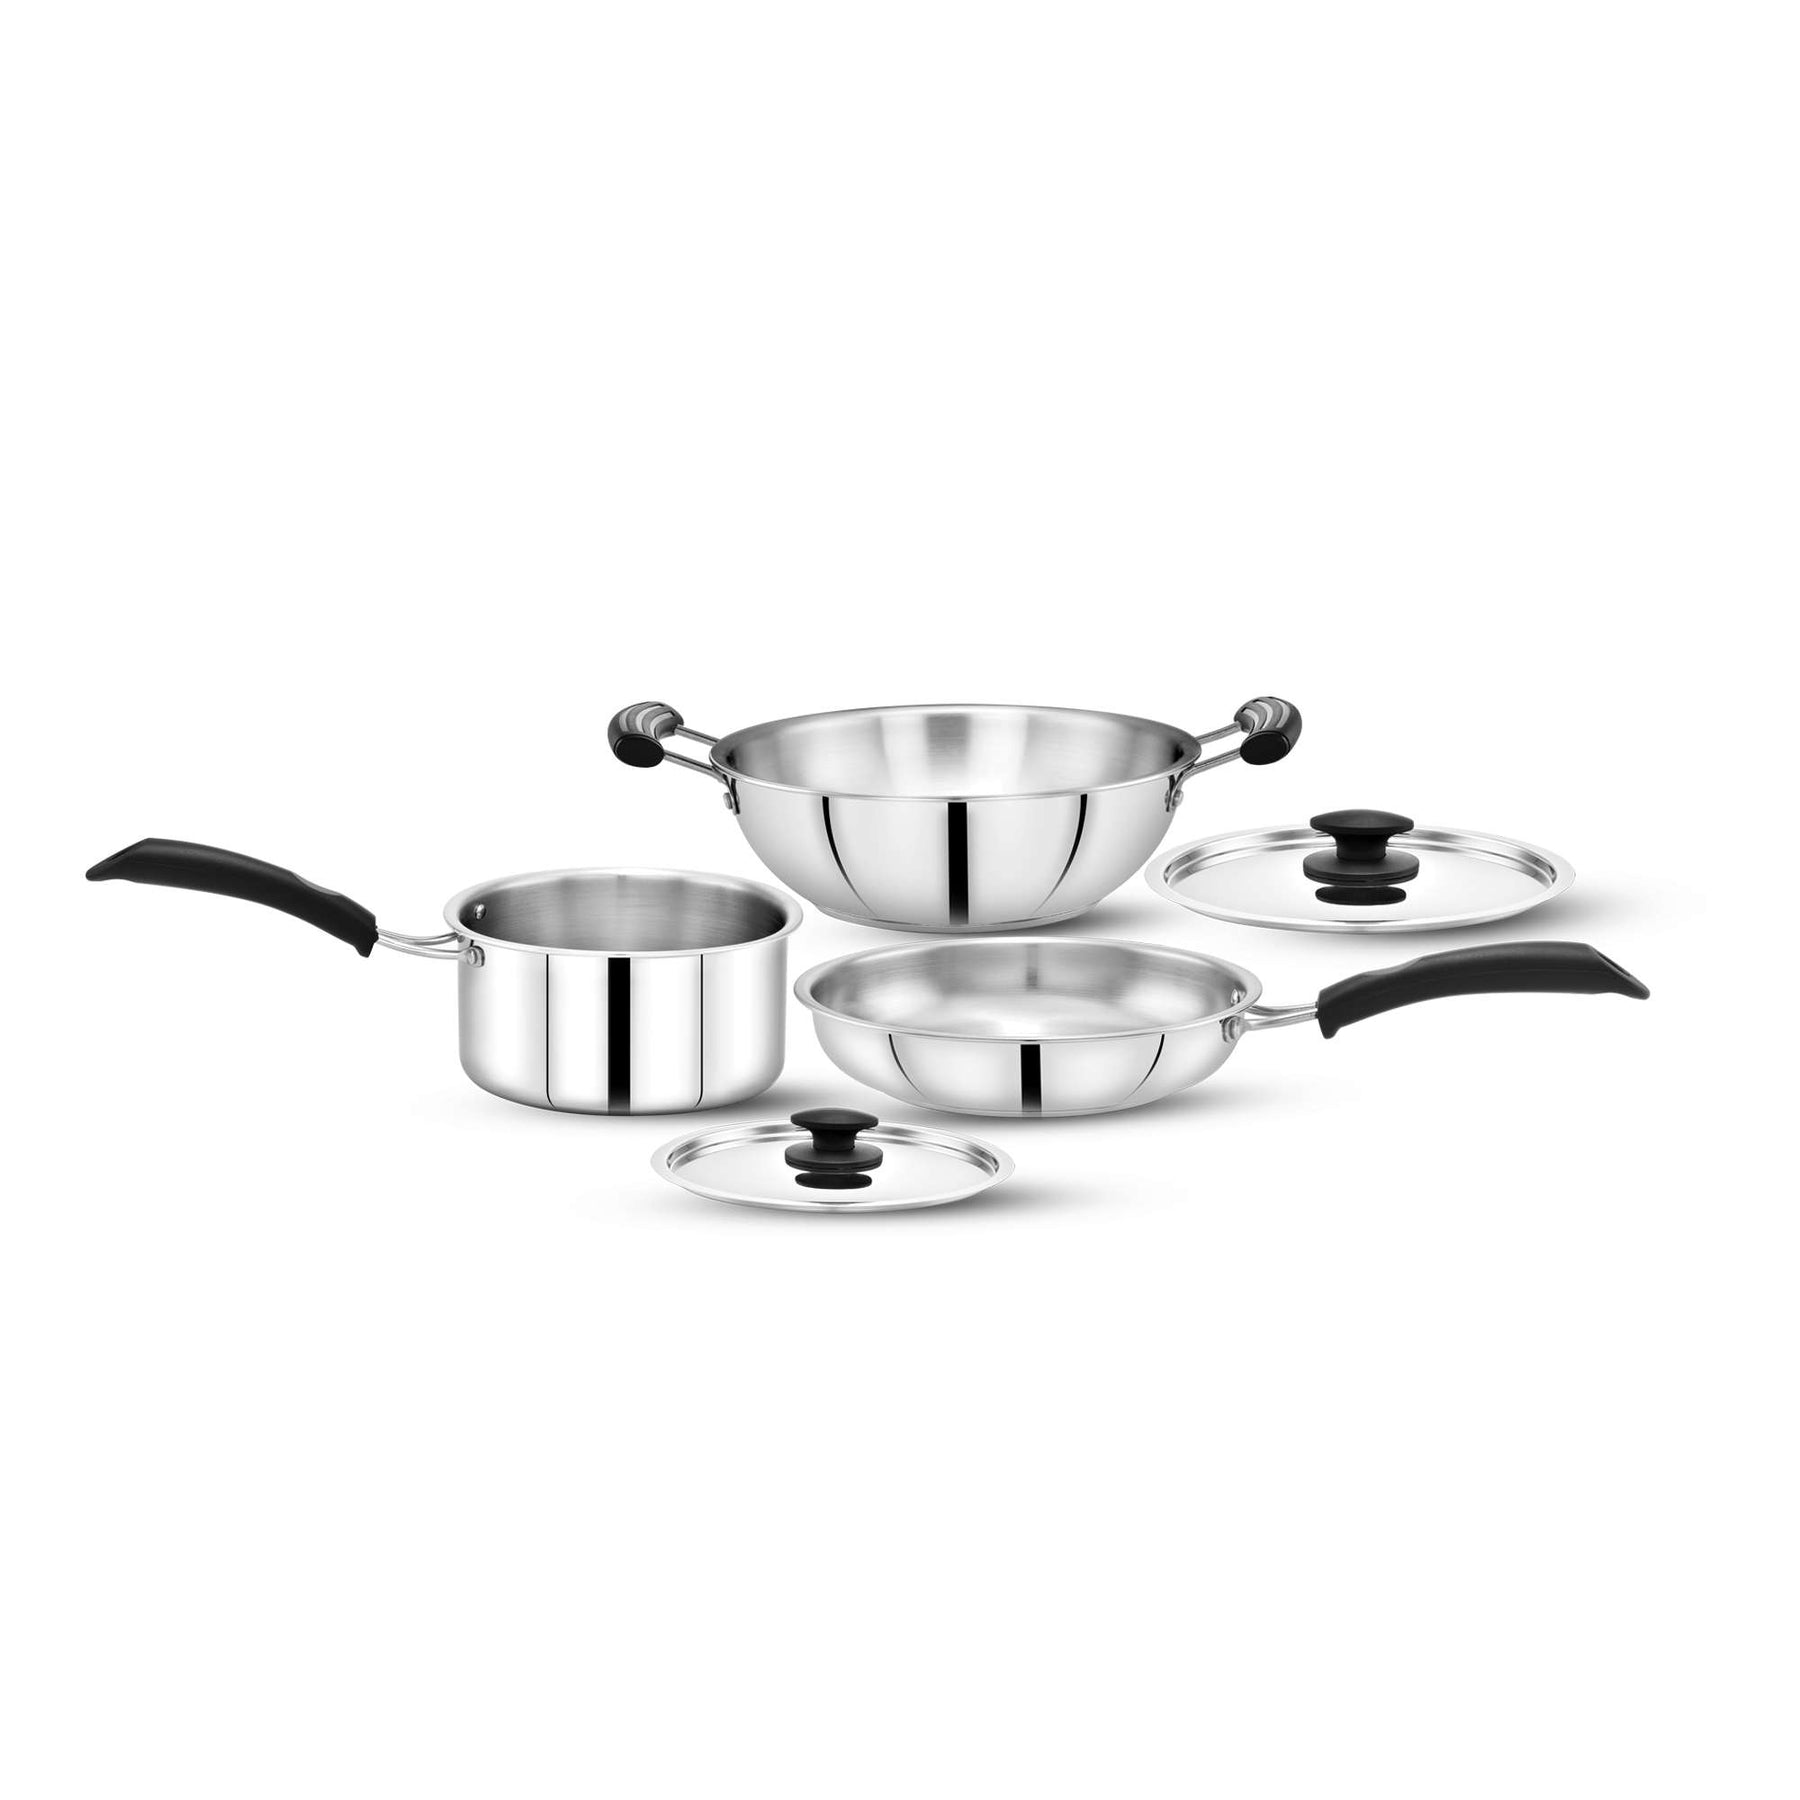 The Maxima's Tri-Ply Stainless Steel Cookware : Best Of Health & Conve –  Maxima Kitchenware